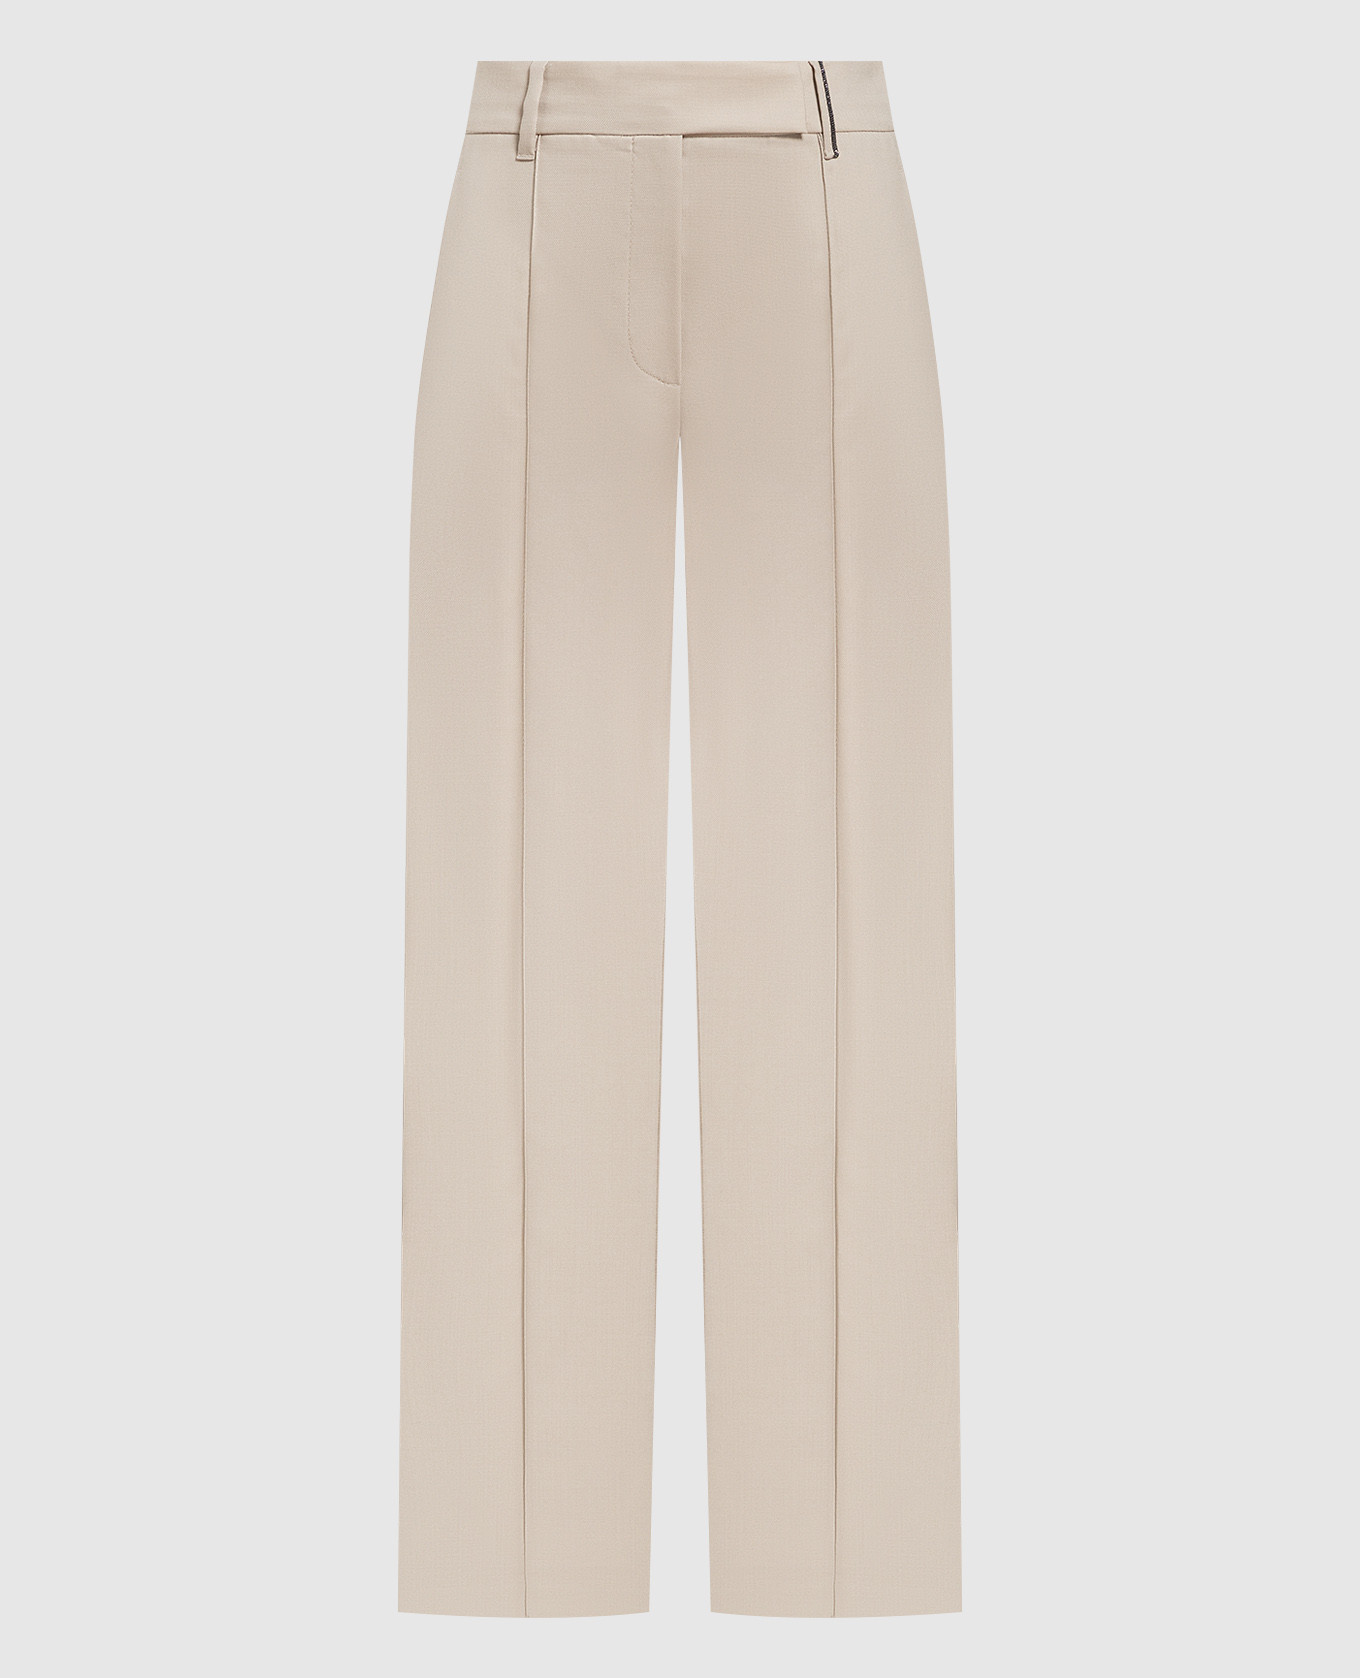 Beige wool trousers with a monil chain